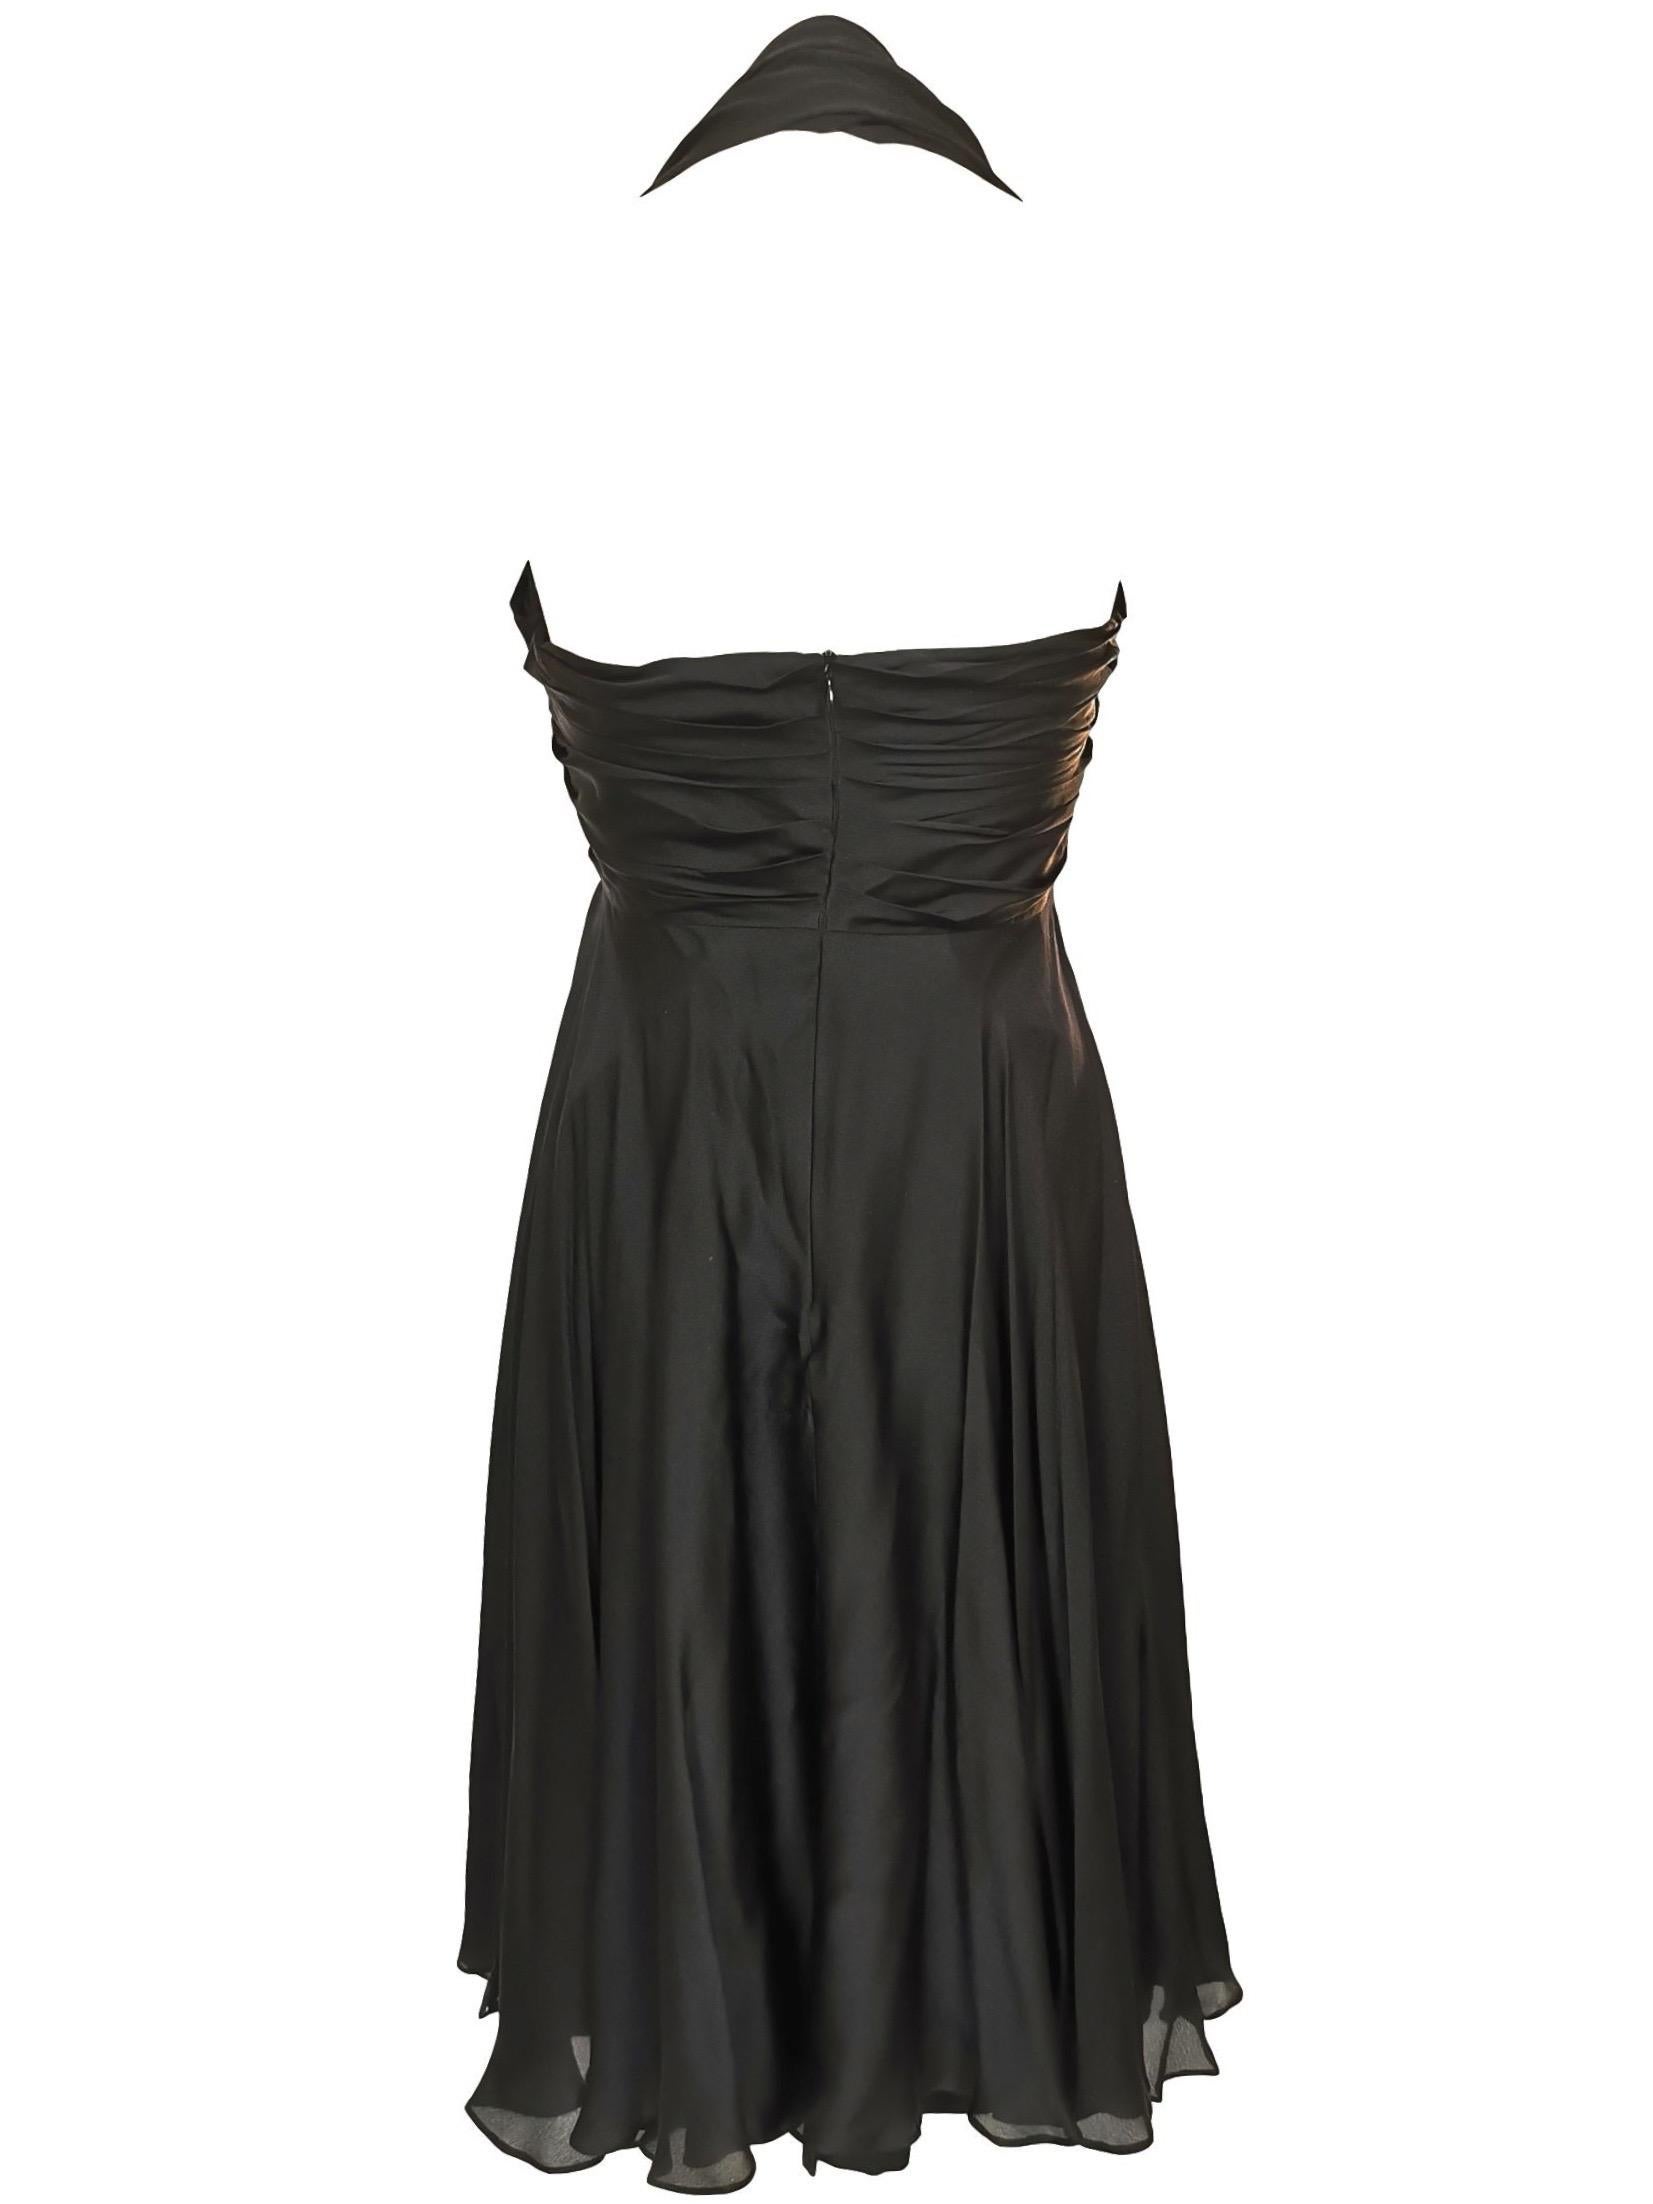 Sophie Sitbon Black Silk and Feather Dress For Sale 1